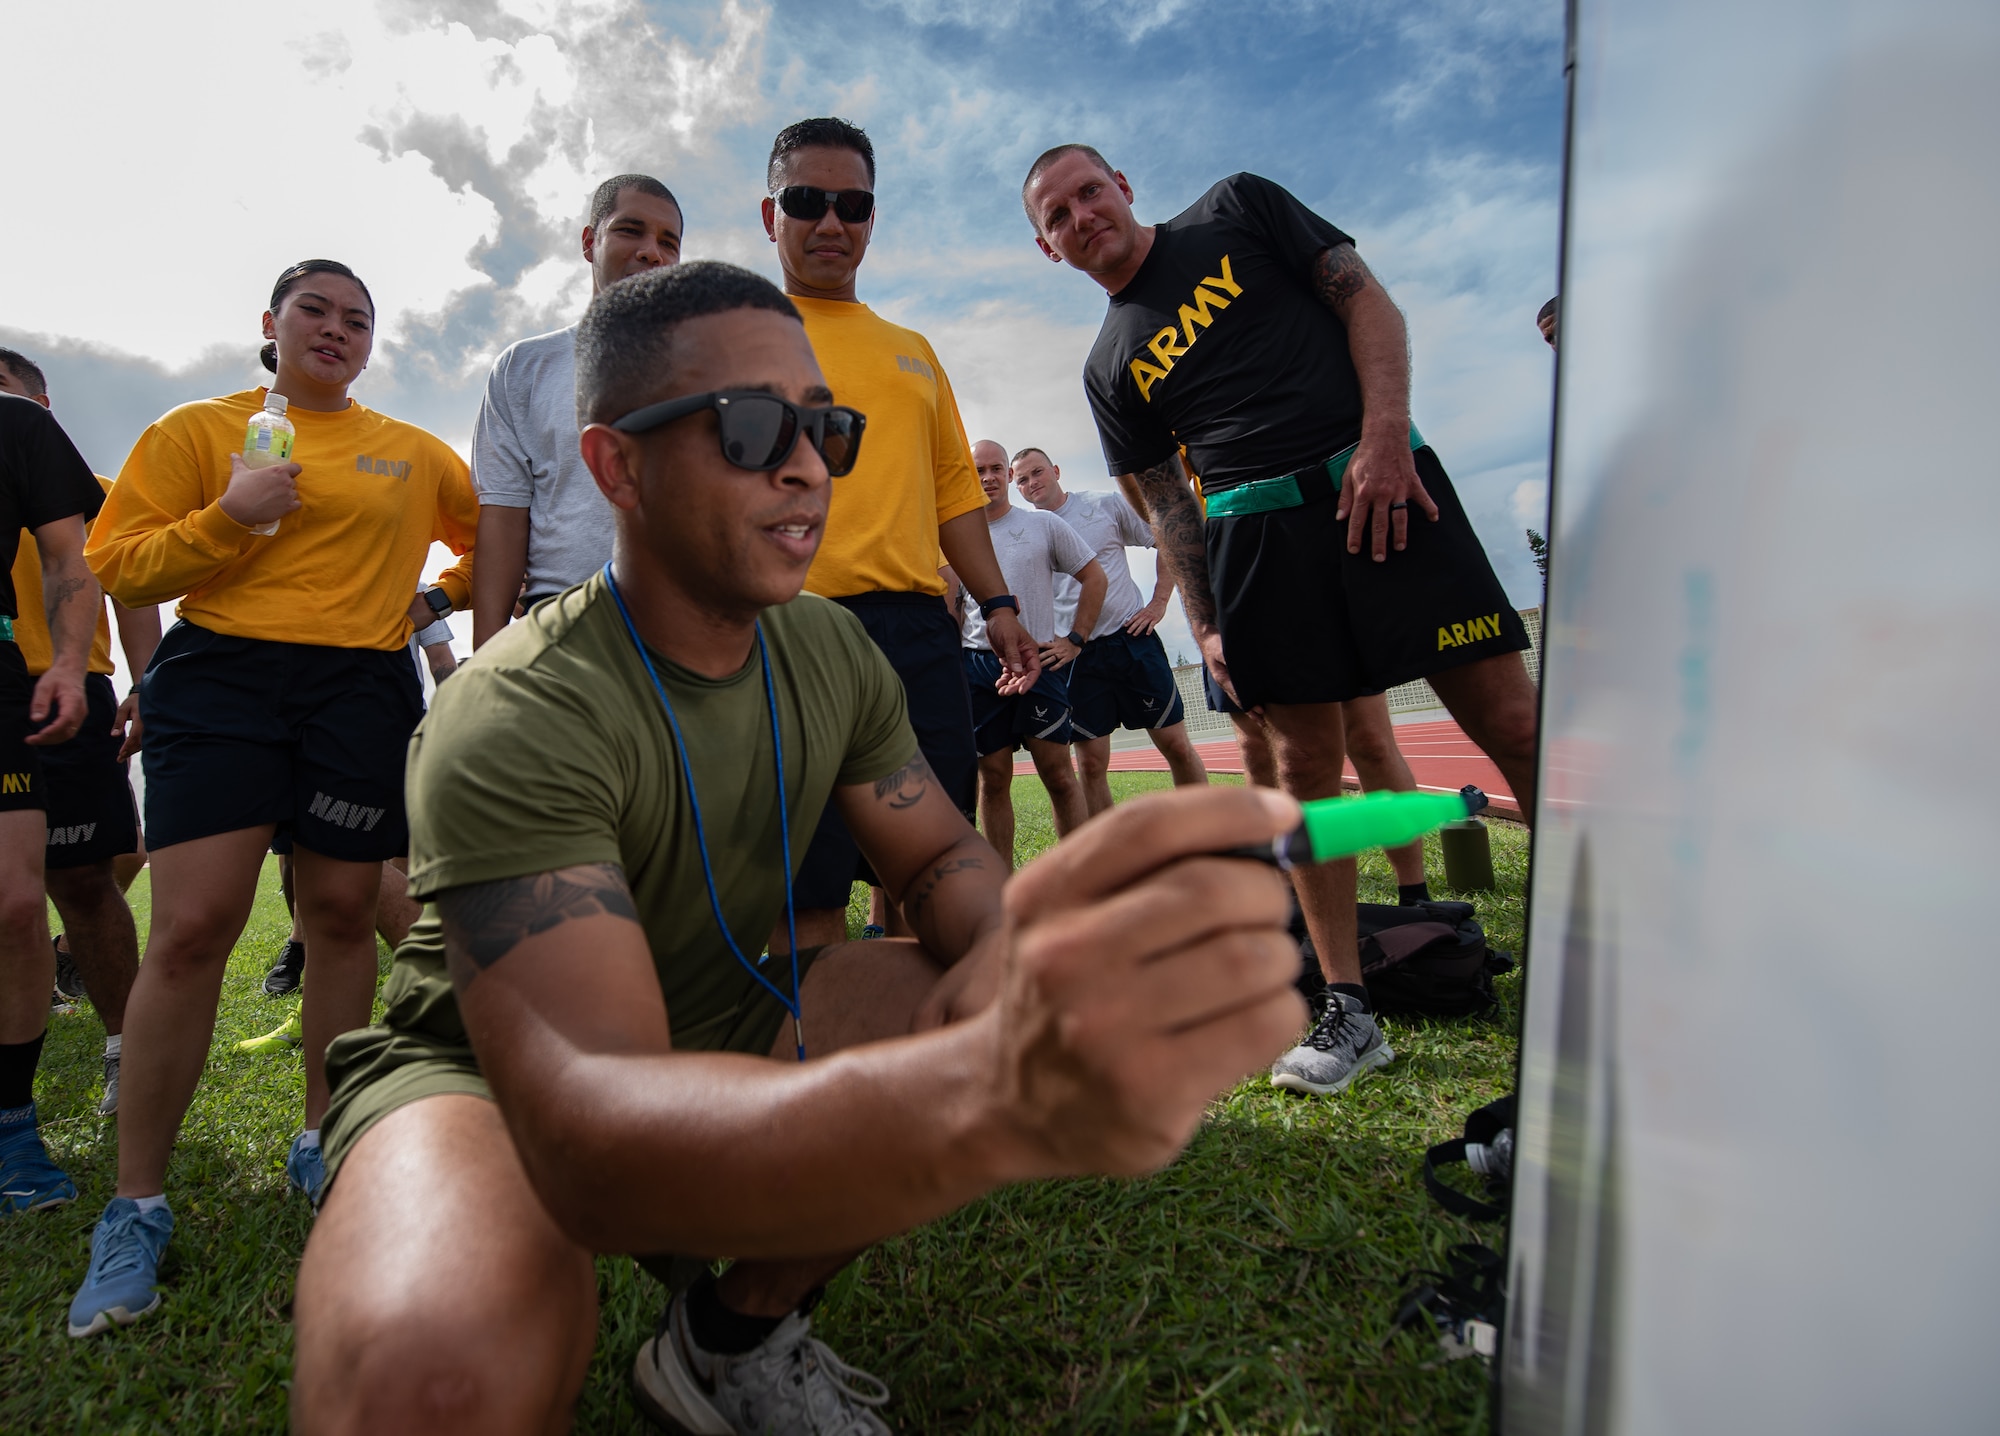 U.S. Marine Corps 1st Sgt. Michael Collins, Okinawa Joint Experience instructor, updates each team’s score during the Okinawa Joint Fitness Challenge Sept. 26, 2018, at Kadena Air Base, Japan. After calculating points from the push-up challenge, combat fitness challenge and tug-of-war, the Green Team was determined the winner of the OJFC. (U.S. Air Force photo by Staff Sgt. Micaiah Anthony)